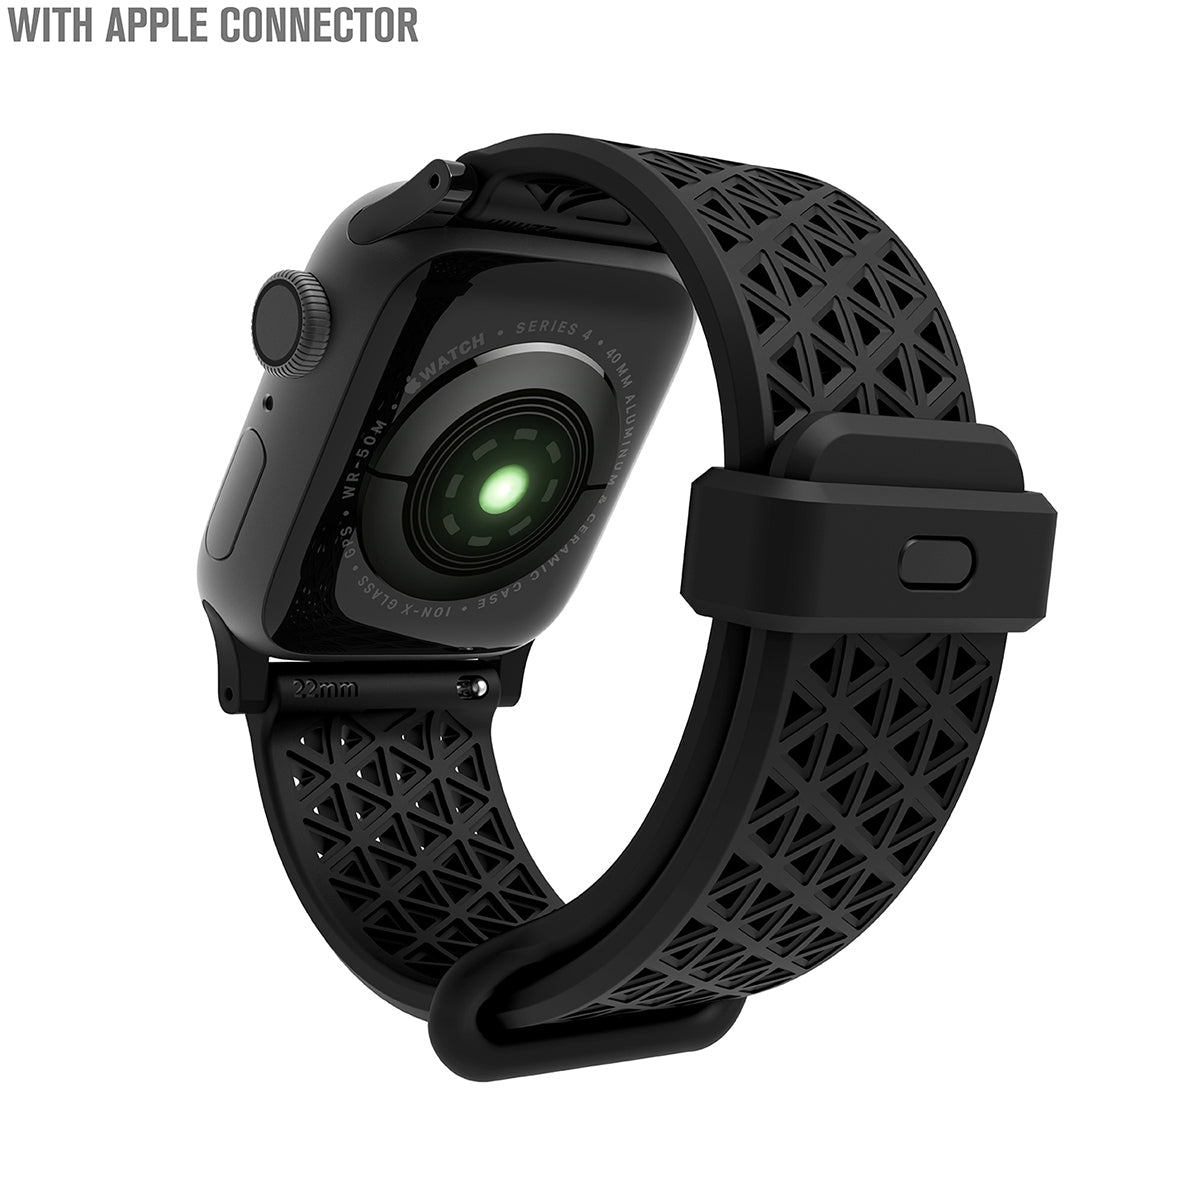 catalyst apple watch series 9 8 7 6 5 4 se gen 2 1 38 40 41mm sports band with apple connector apple watch back view with sports band black text reads with apple connector